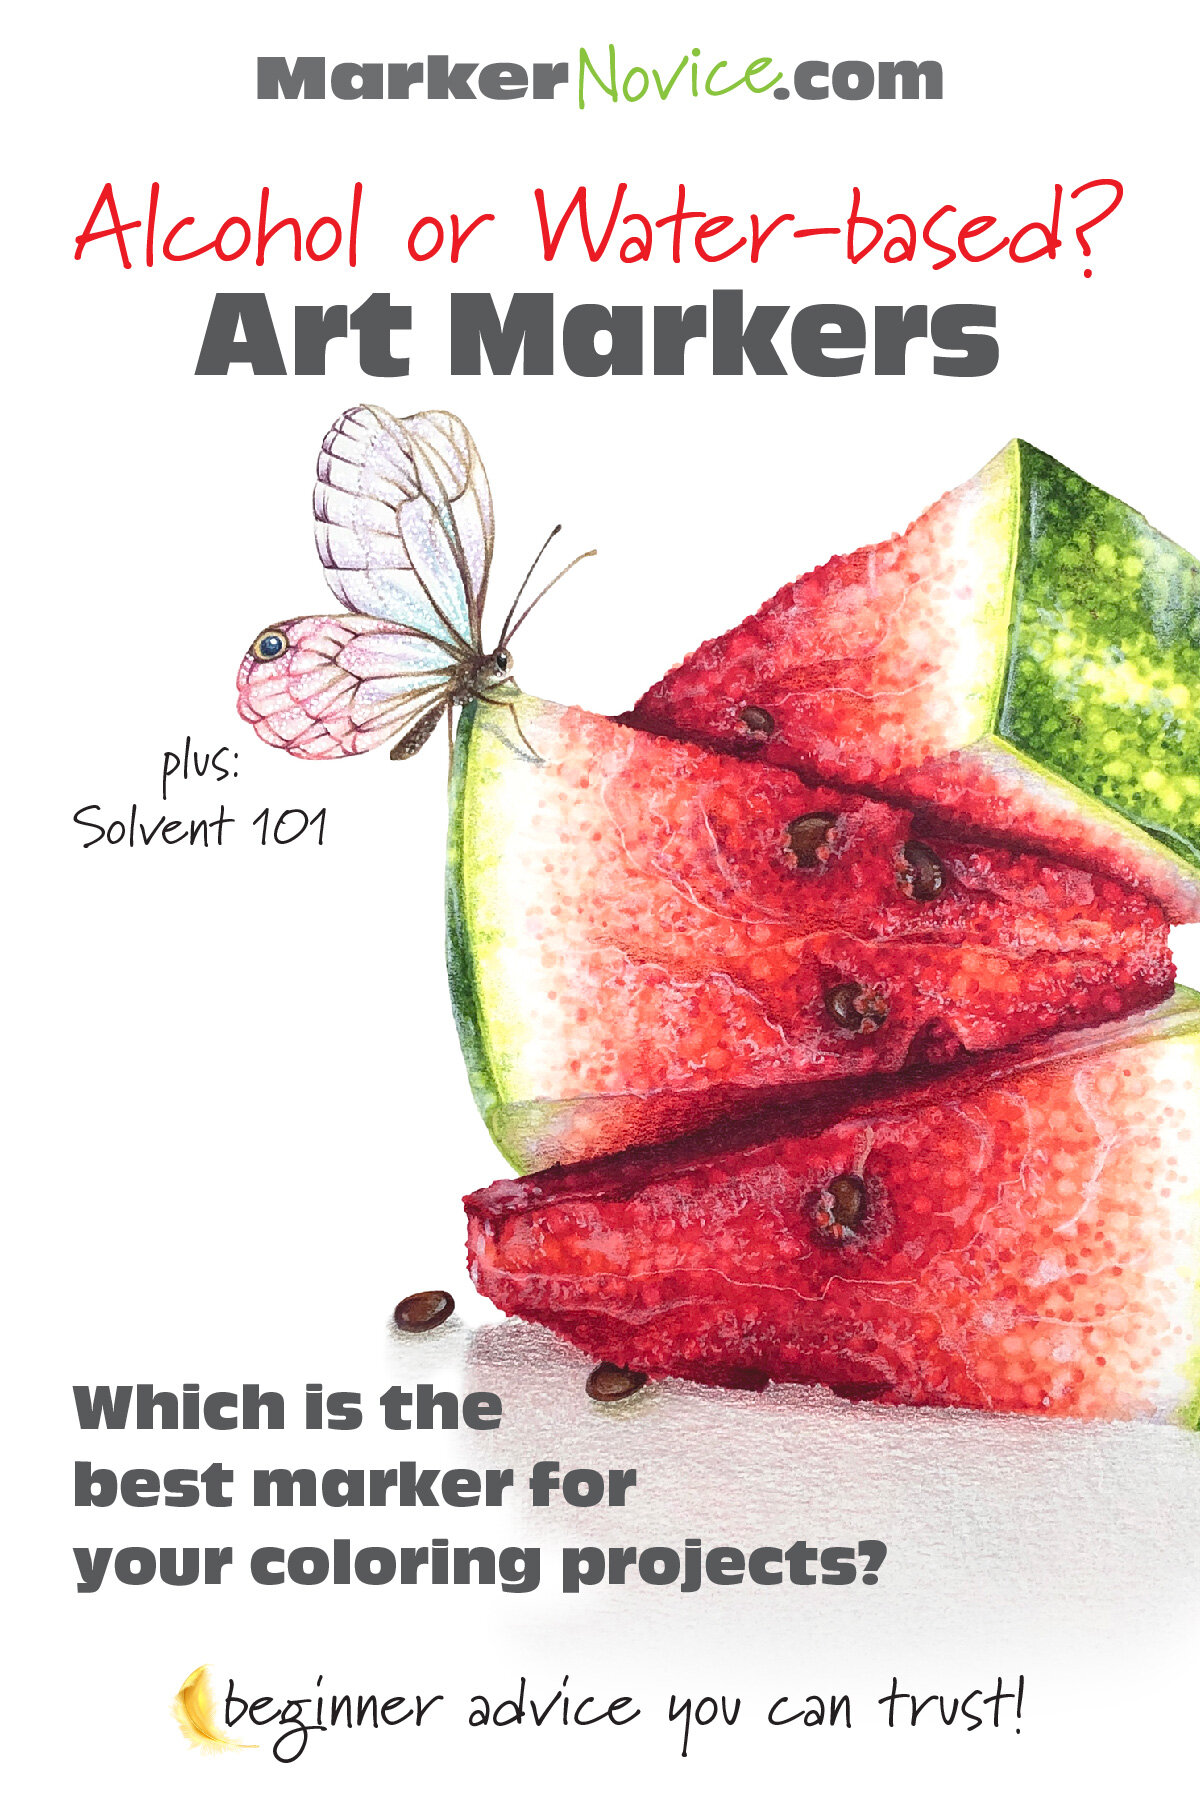 Alcohol Markers or Water-based Markers: Which are best for coloring? —  Marker Novice